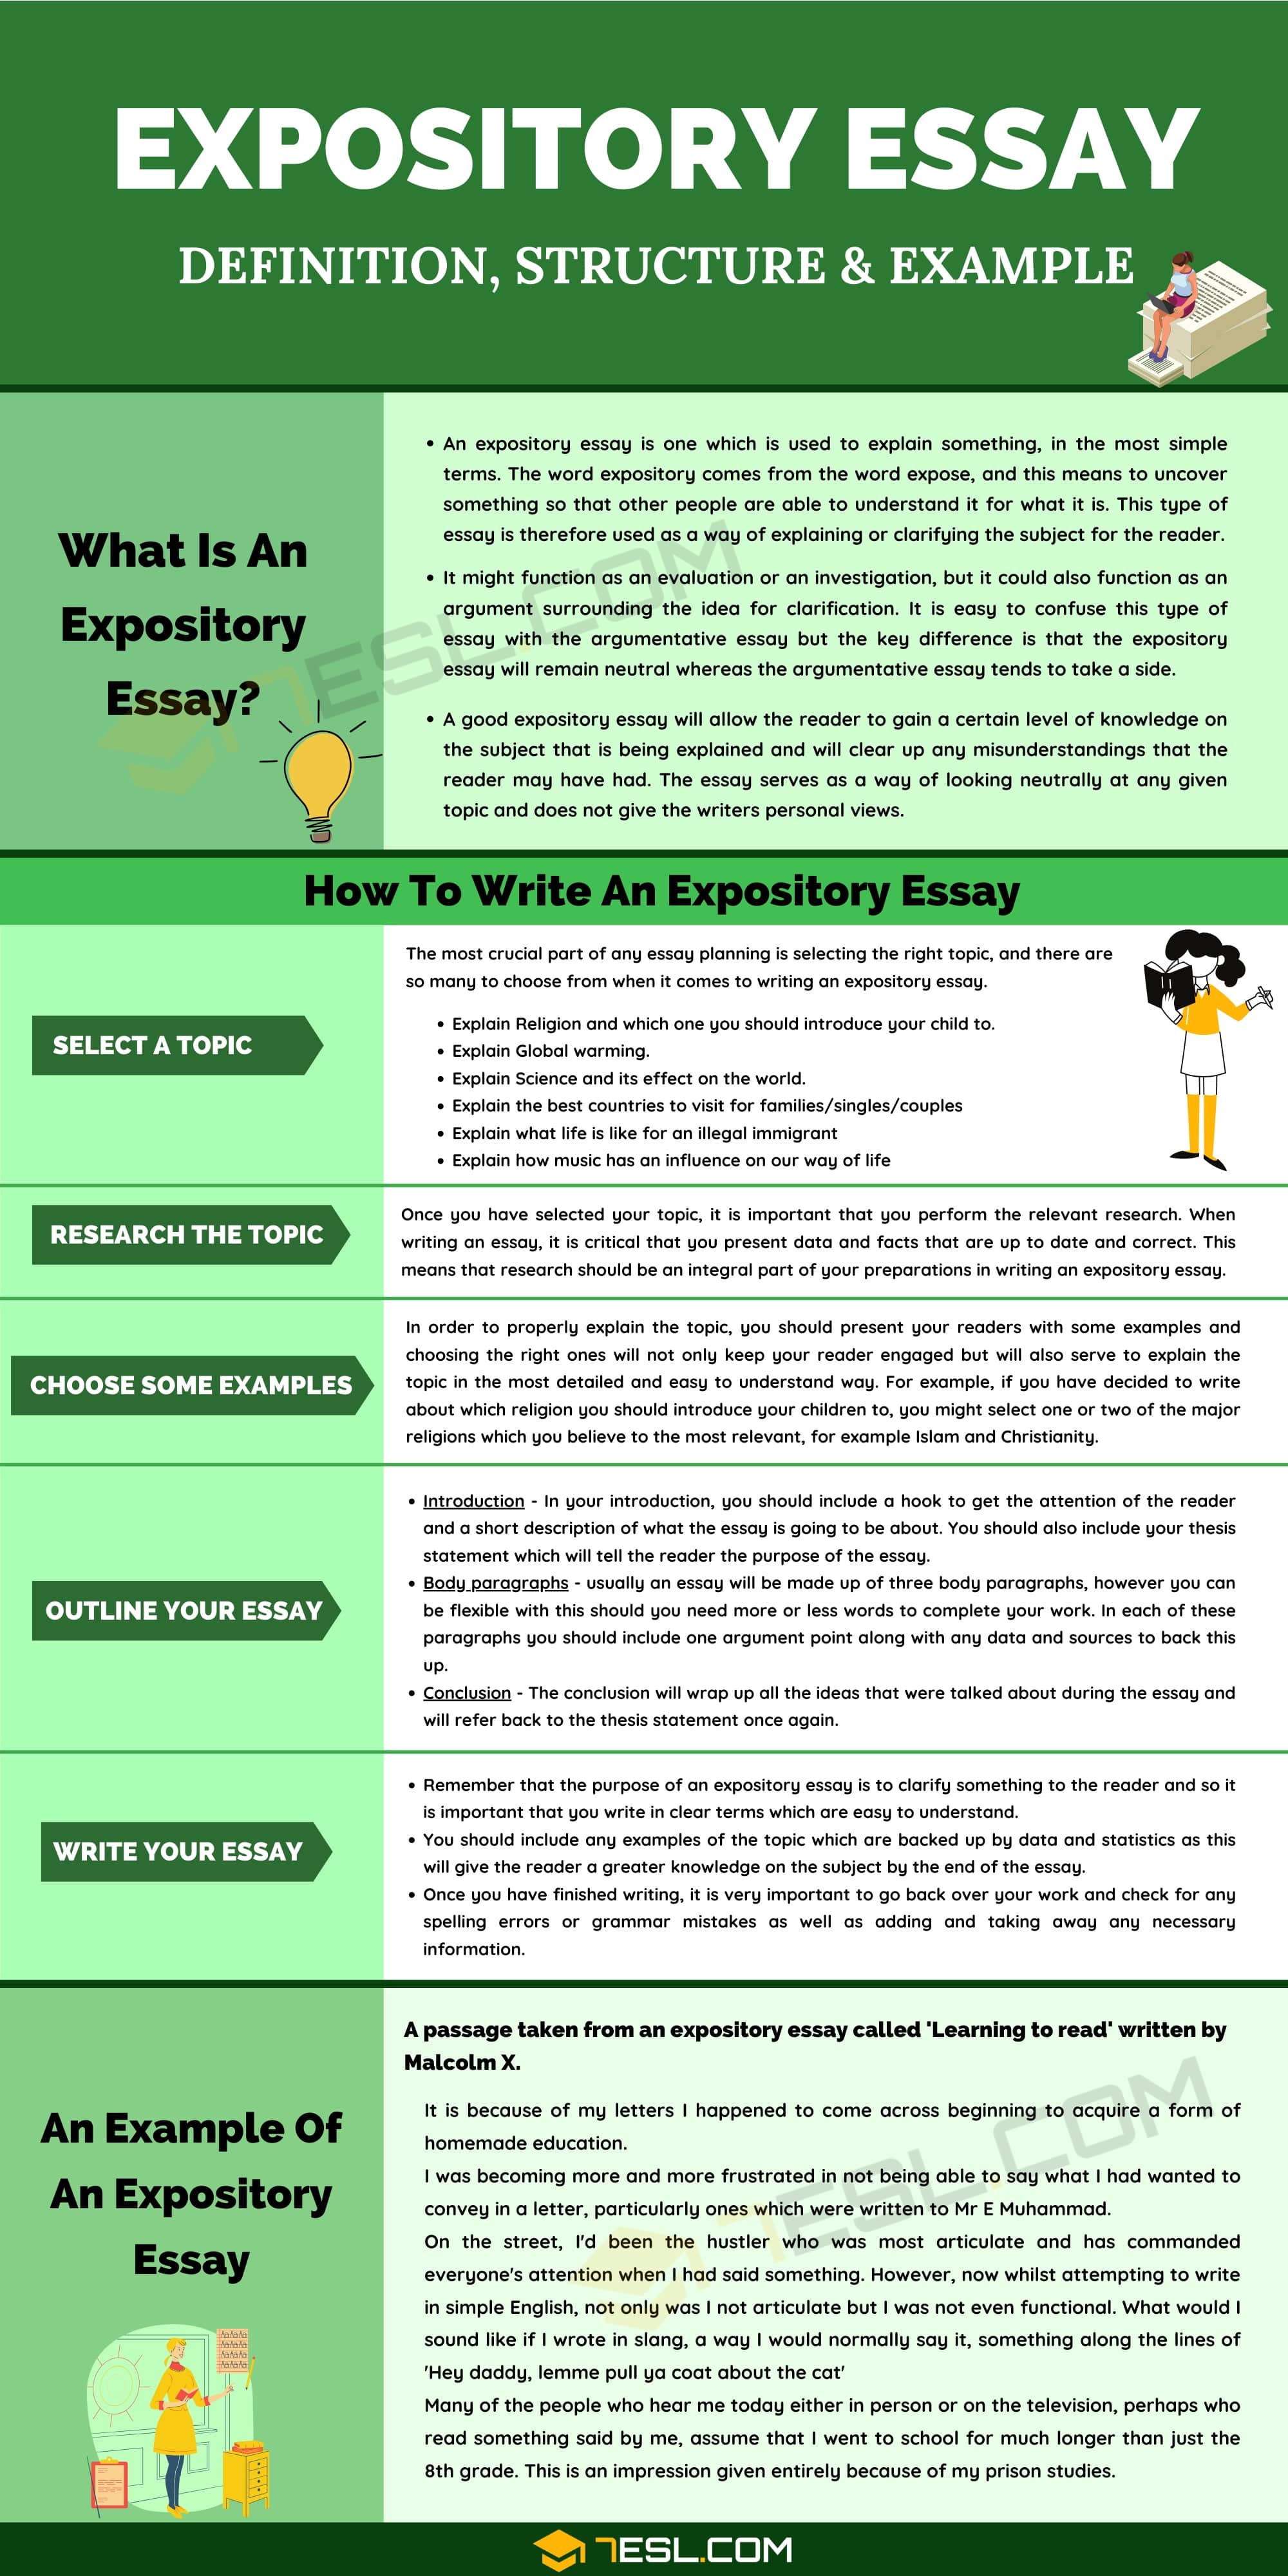 How To Start An Expository Essay Introduction